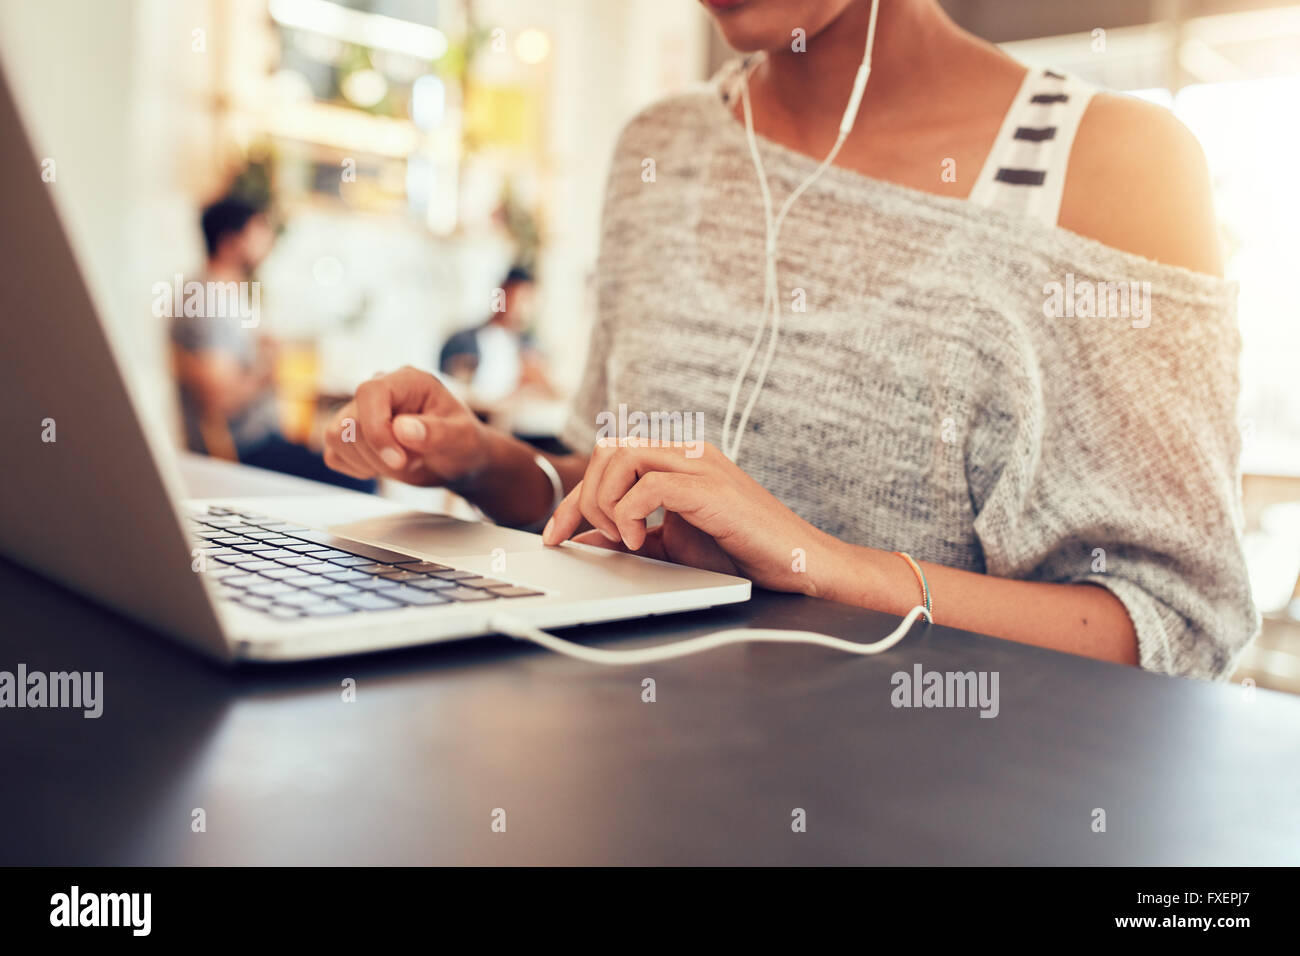 Cropped image of young woman using laptop at coffee shop. Close up portrait of woman working on laptop computer, with focus on l Stock Photo